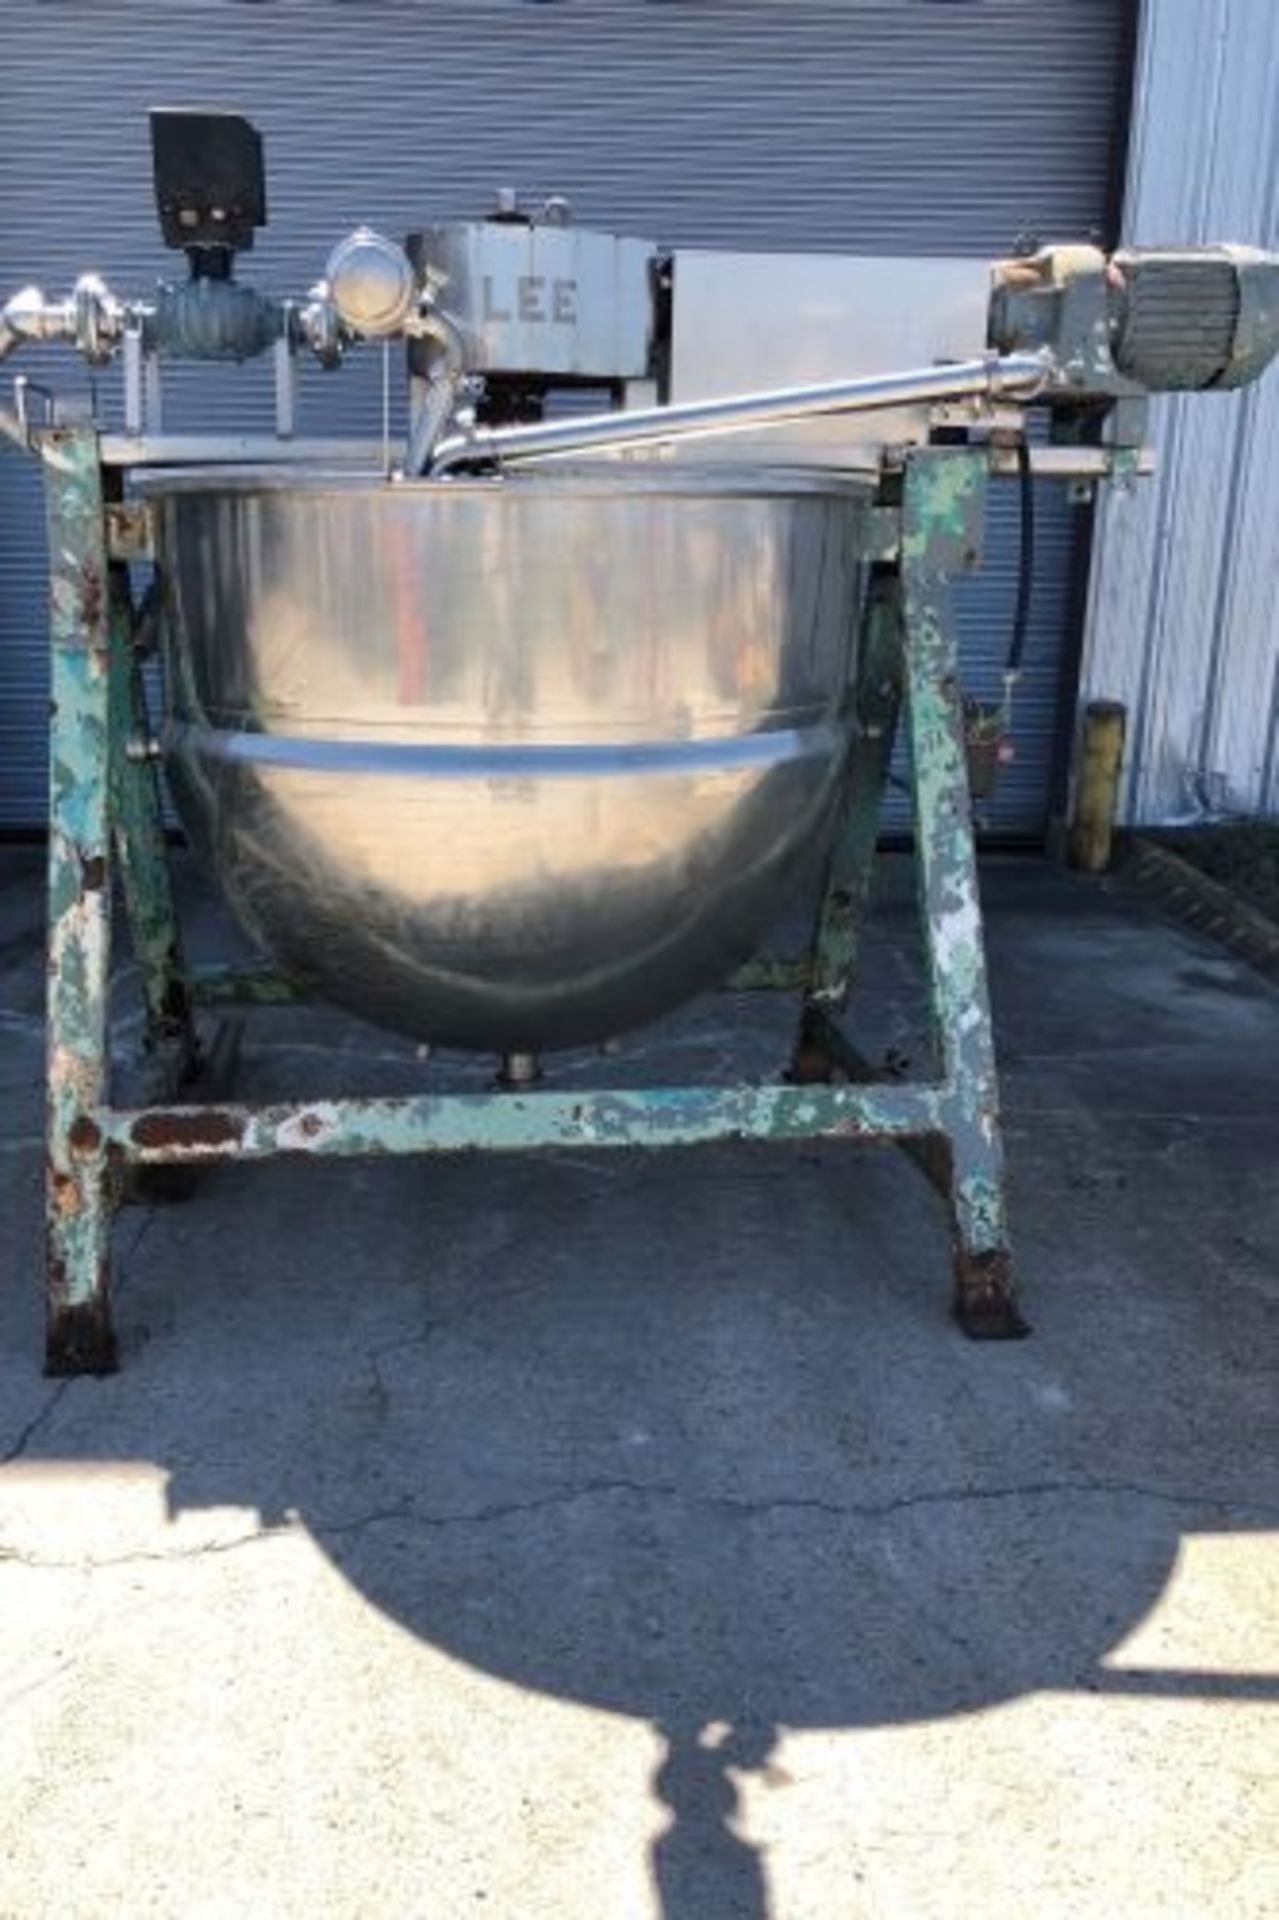 450 gallon Lee scrape surface jacketed kettle - Image 4 of 5